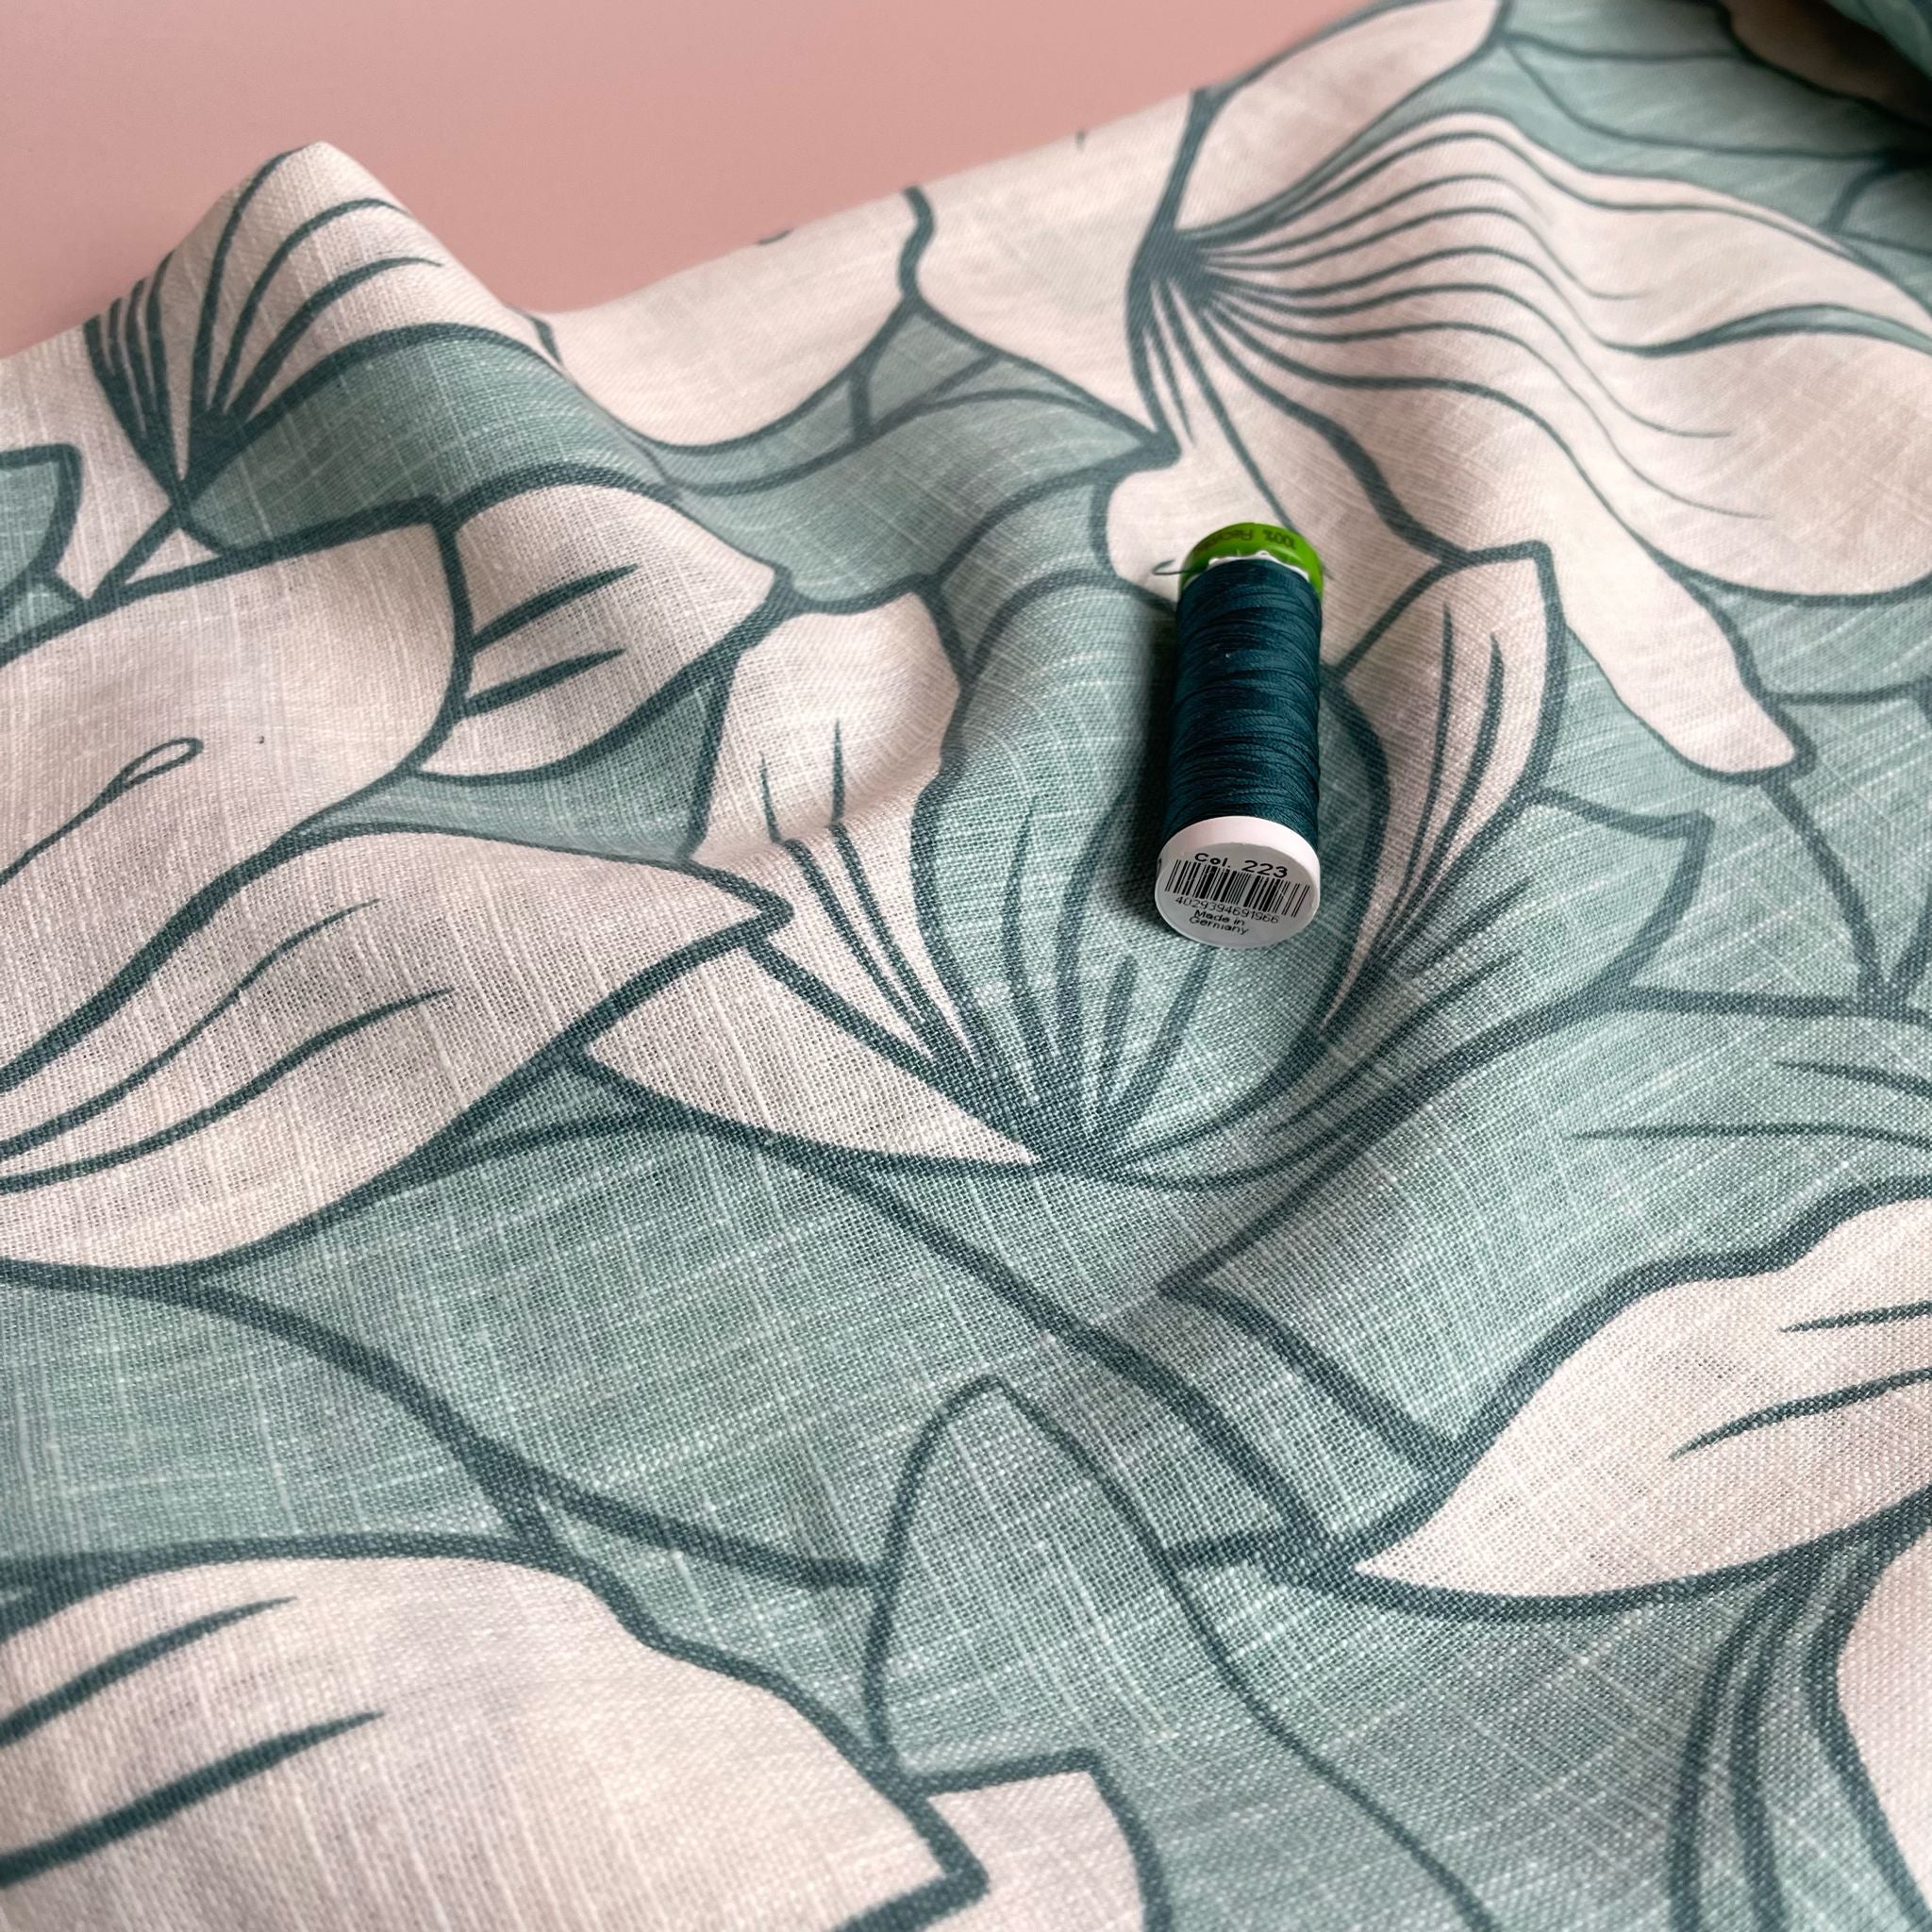 Pale Teal Leaves on Soft Washed Linen Cotton Fabric